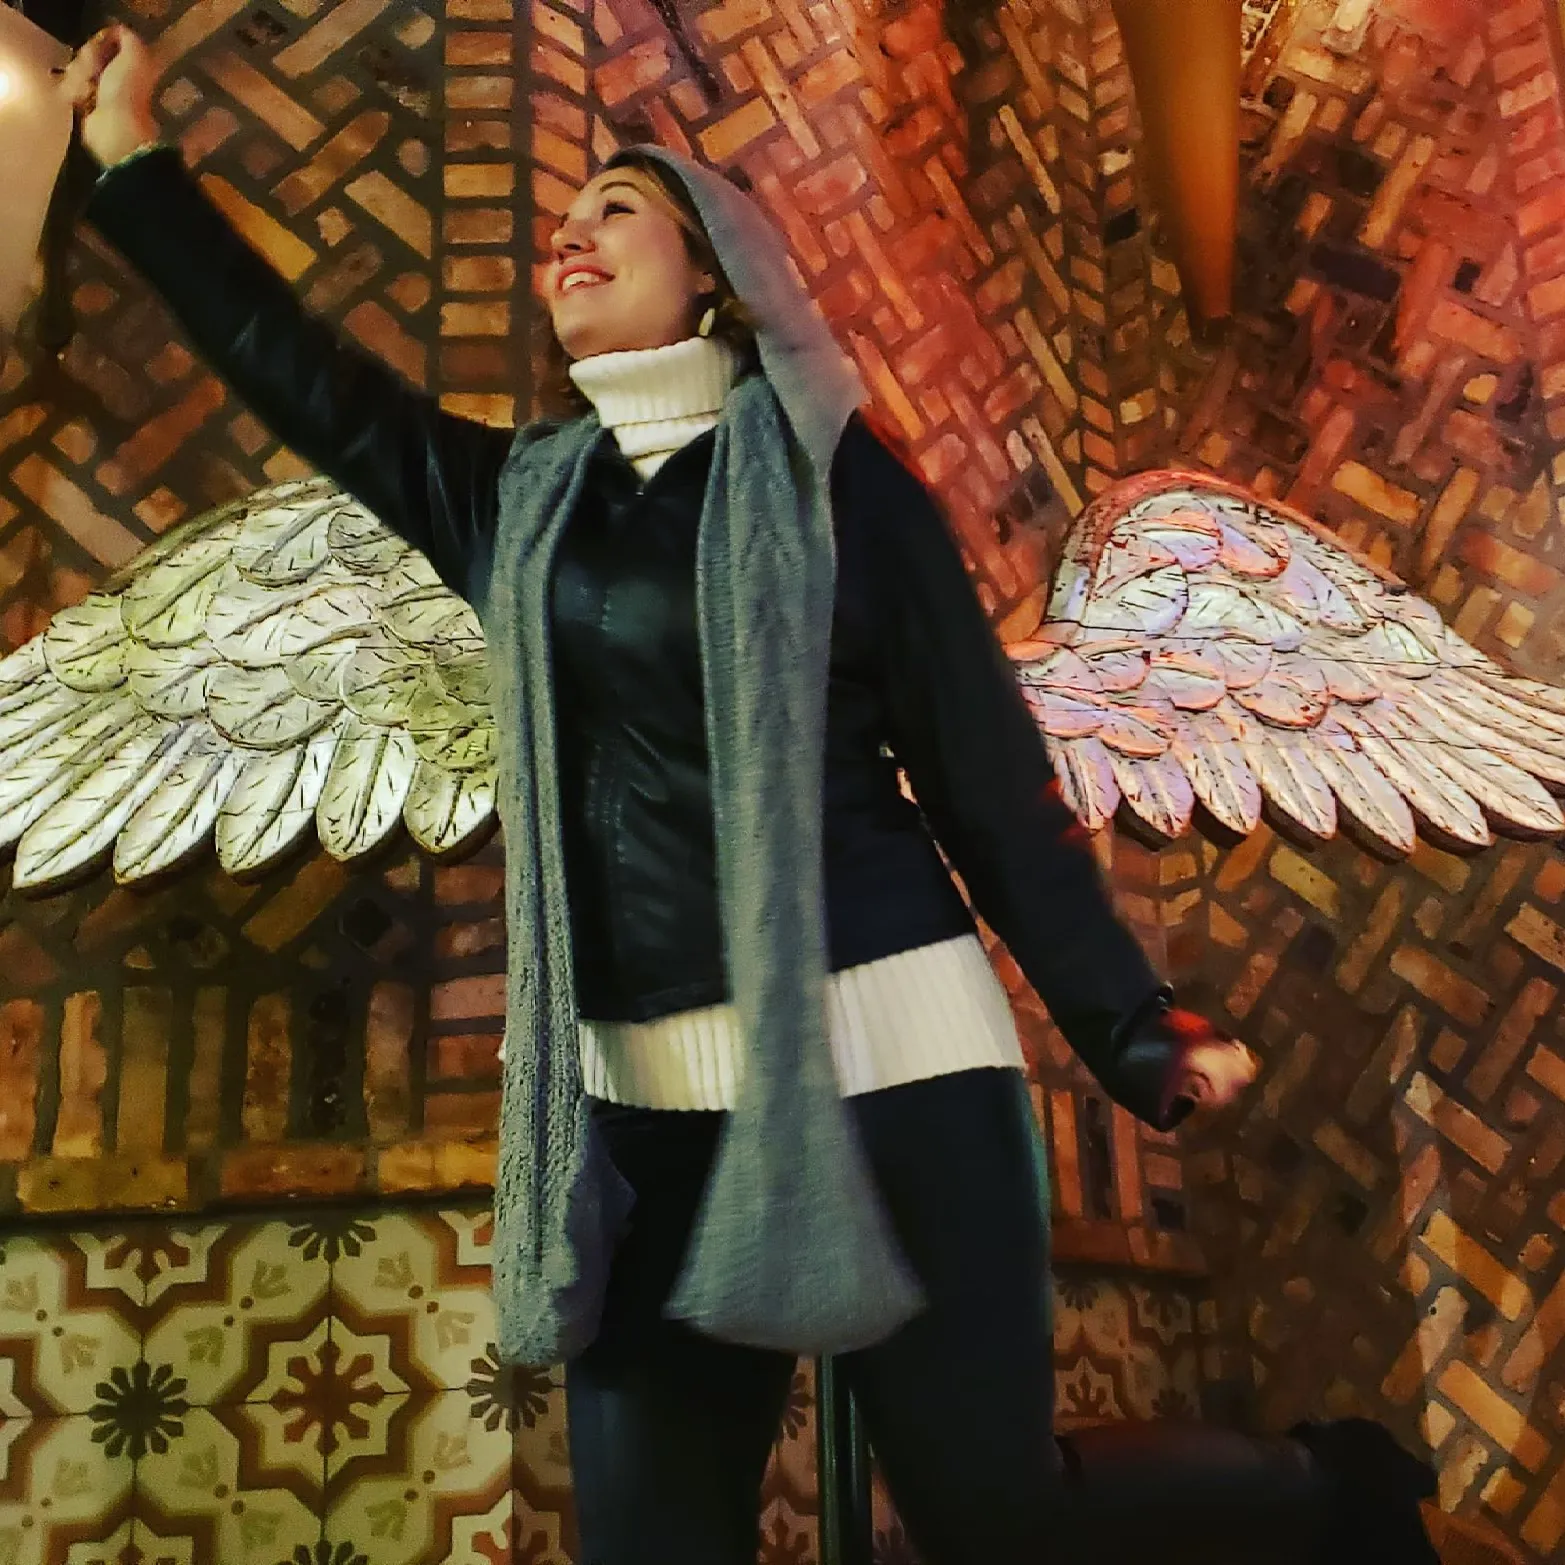 A woman wearing a scarf is standing in front of a wall with angel wings on it